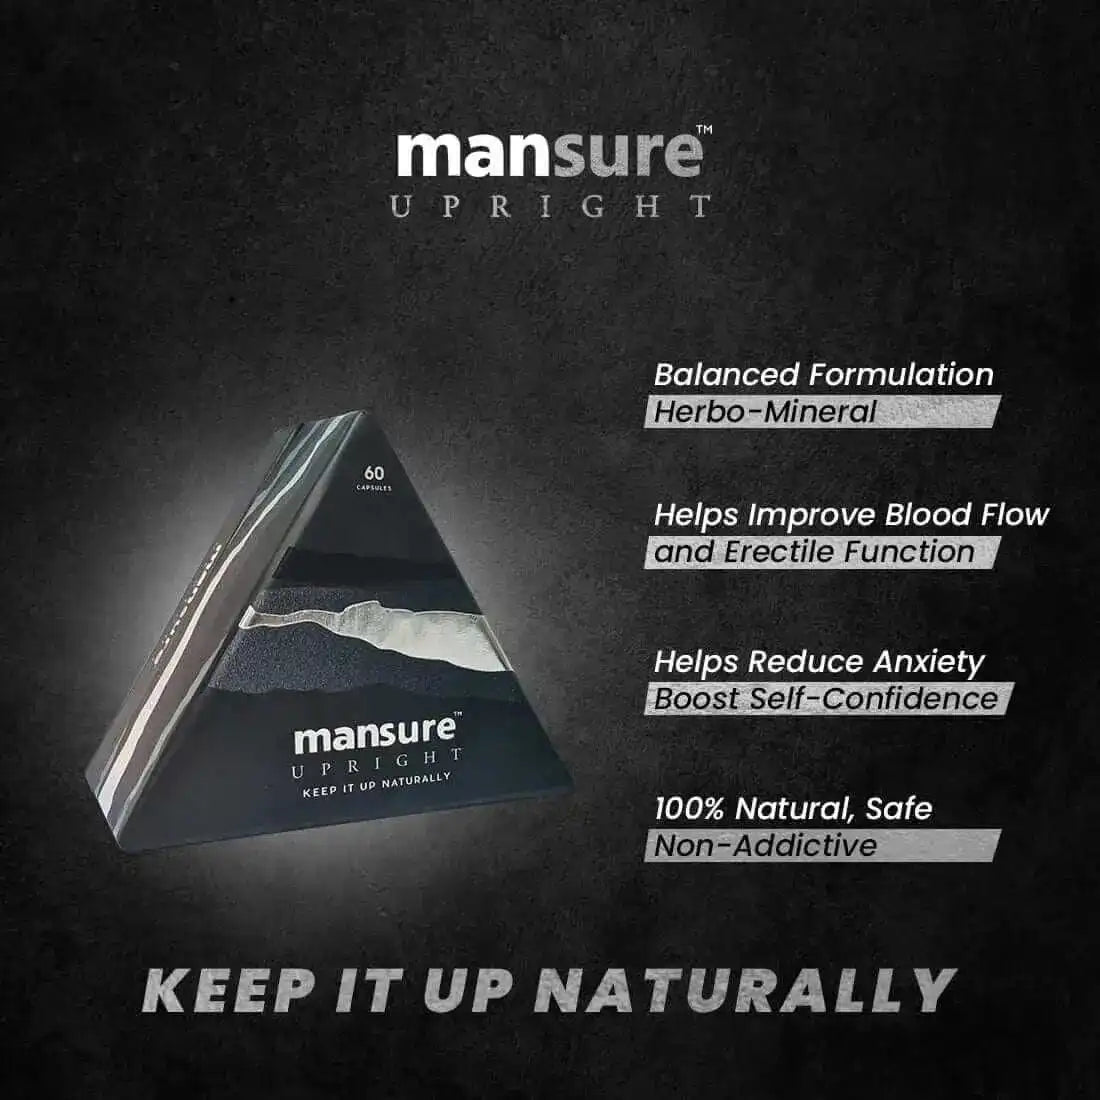 ManSure Upright Capsules For Men's Health Help You Keep It Up Naturally